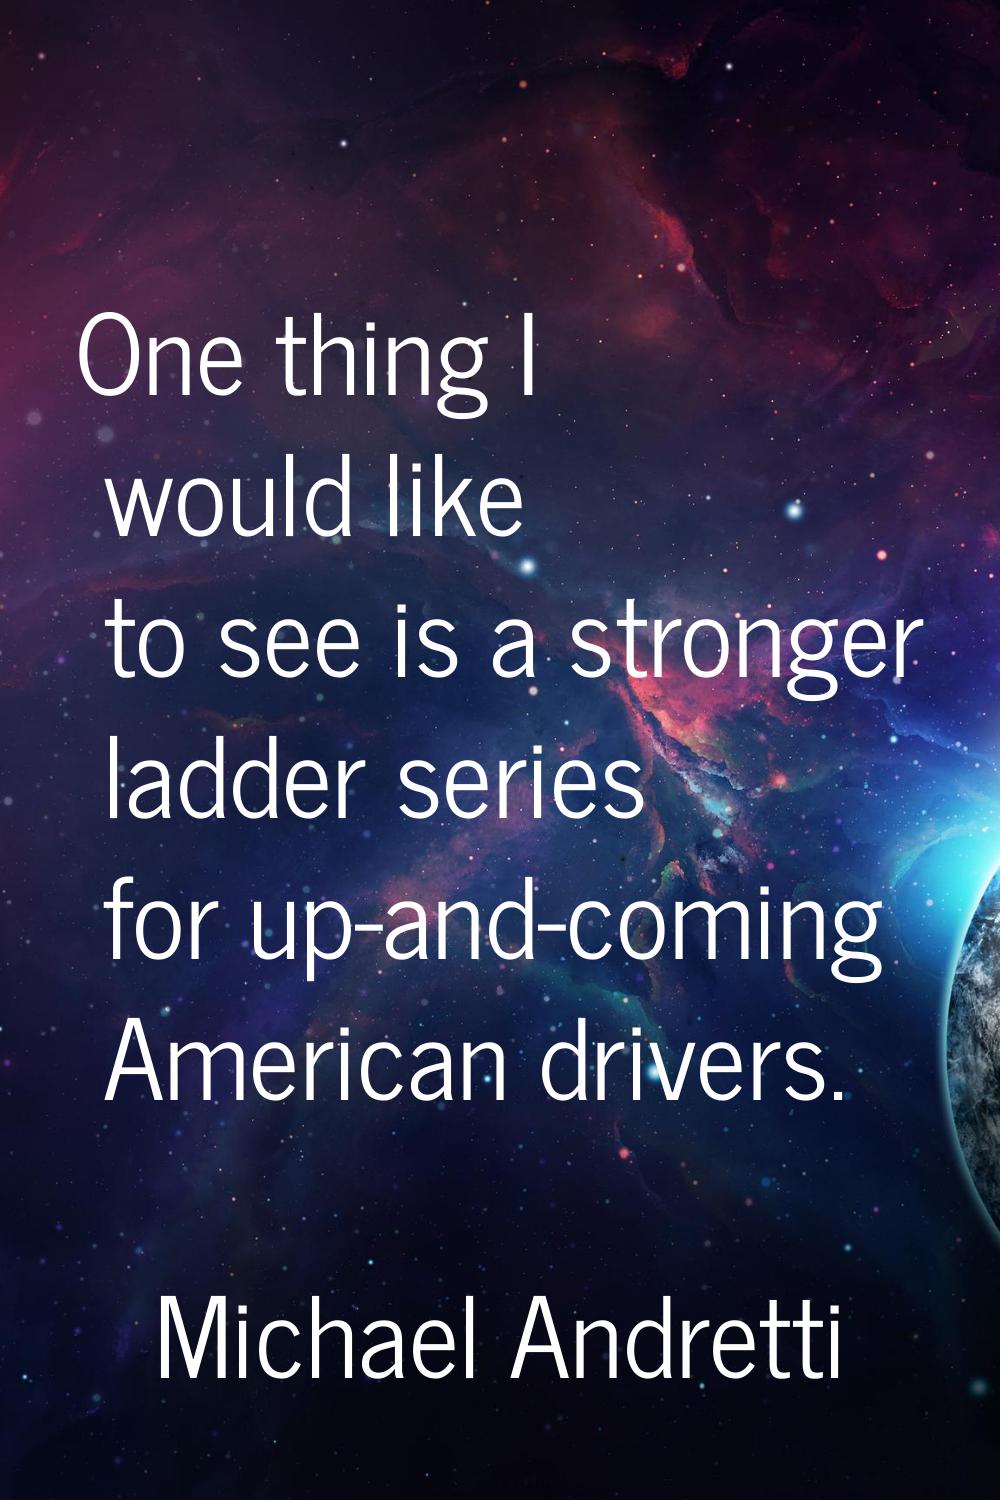 One thing I would like to see is a stronger ladder series for up-and-coming American drivers.